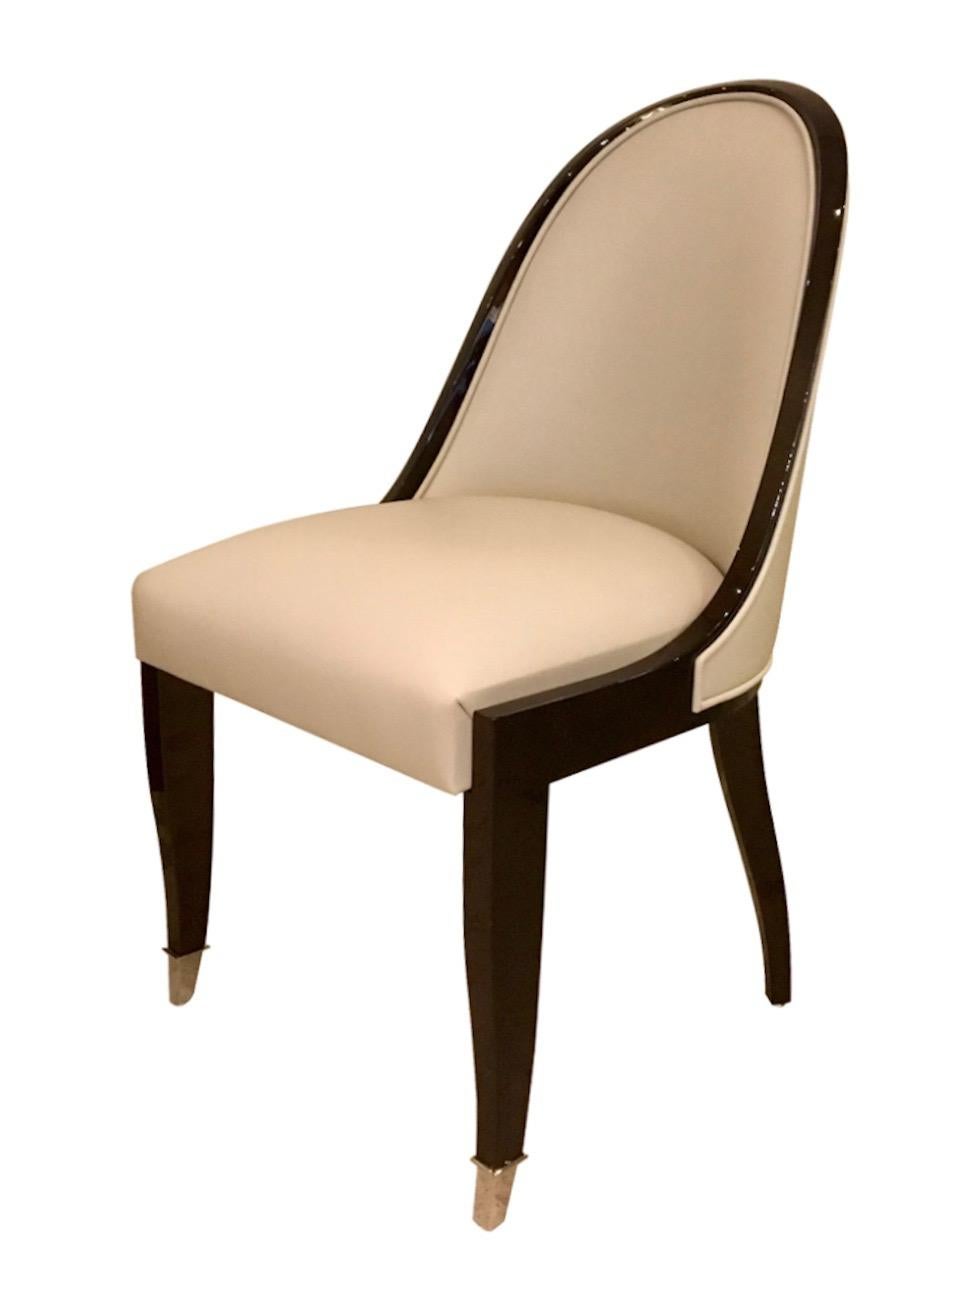 German Chair with Narrow Curved Backrest in Art Deco Style with Leather and Wood For Sale